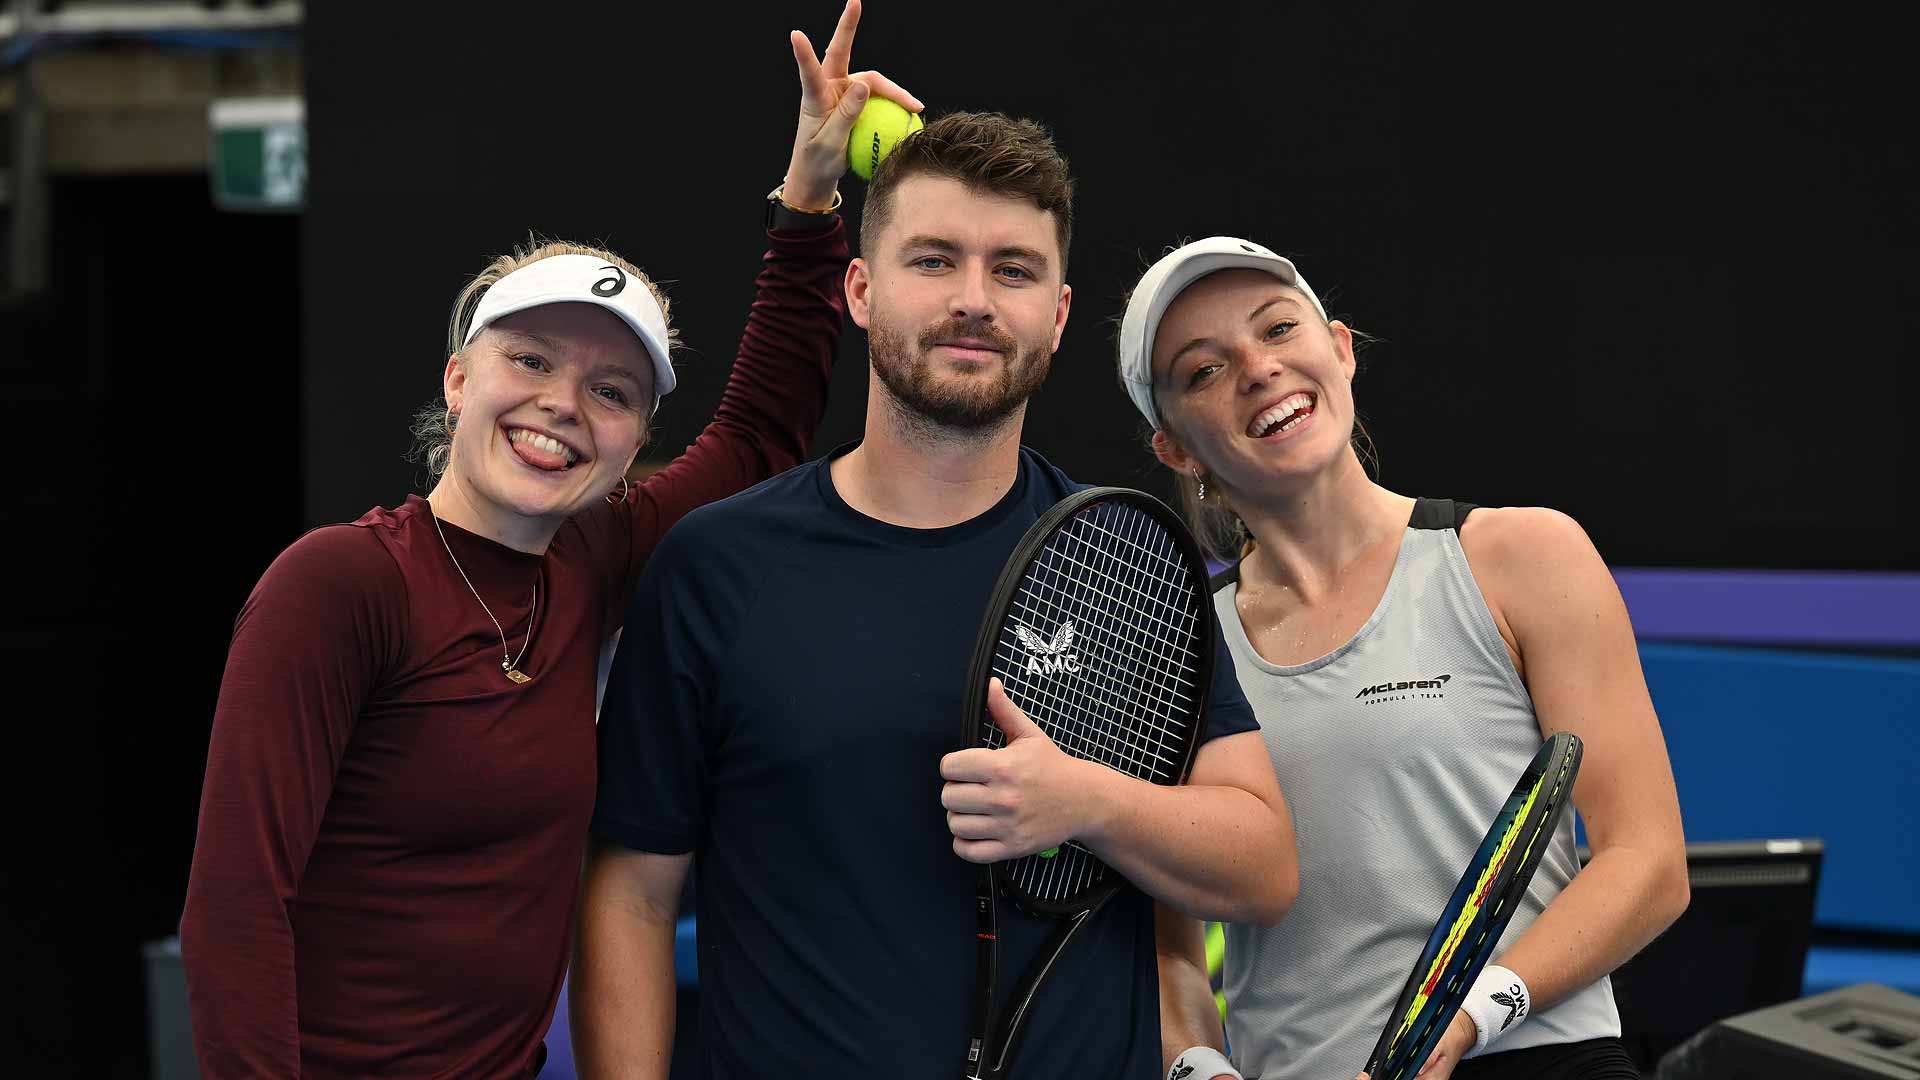 Team Great Birtain's Harriet Dart, Jonny O'Mara and Katie Swan practise together on Tuesday in Sydney.